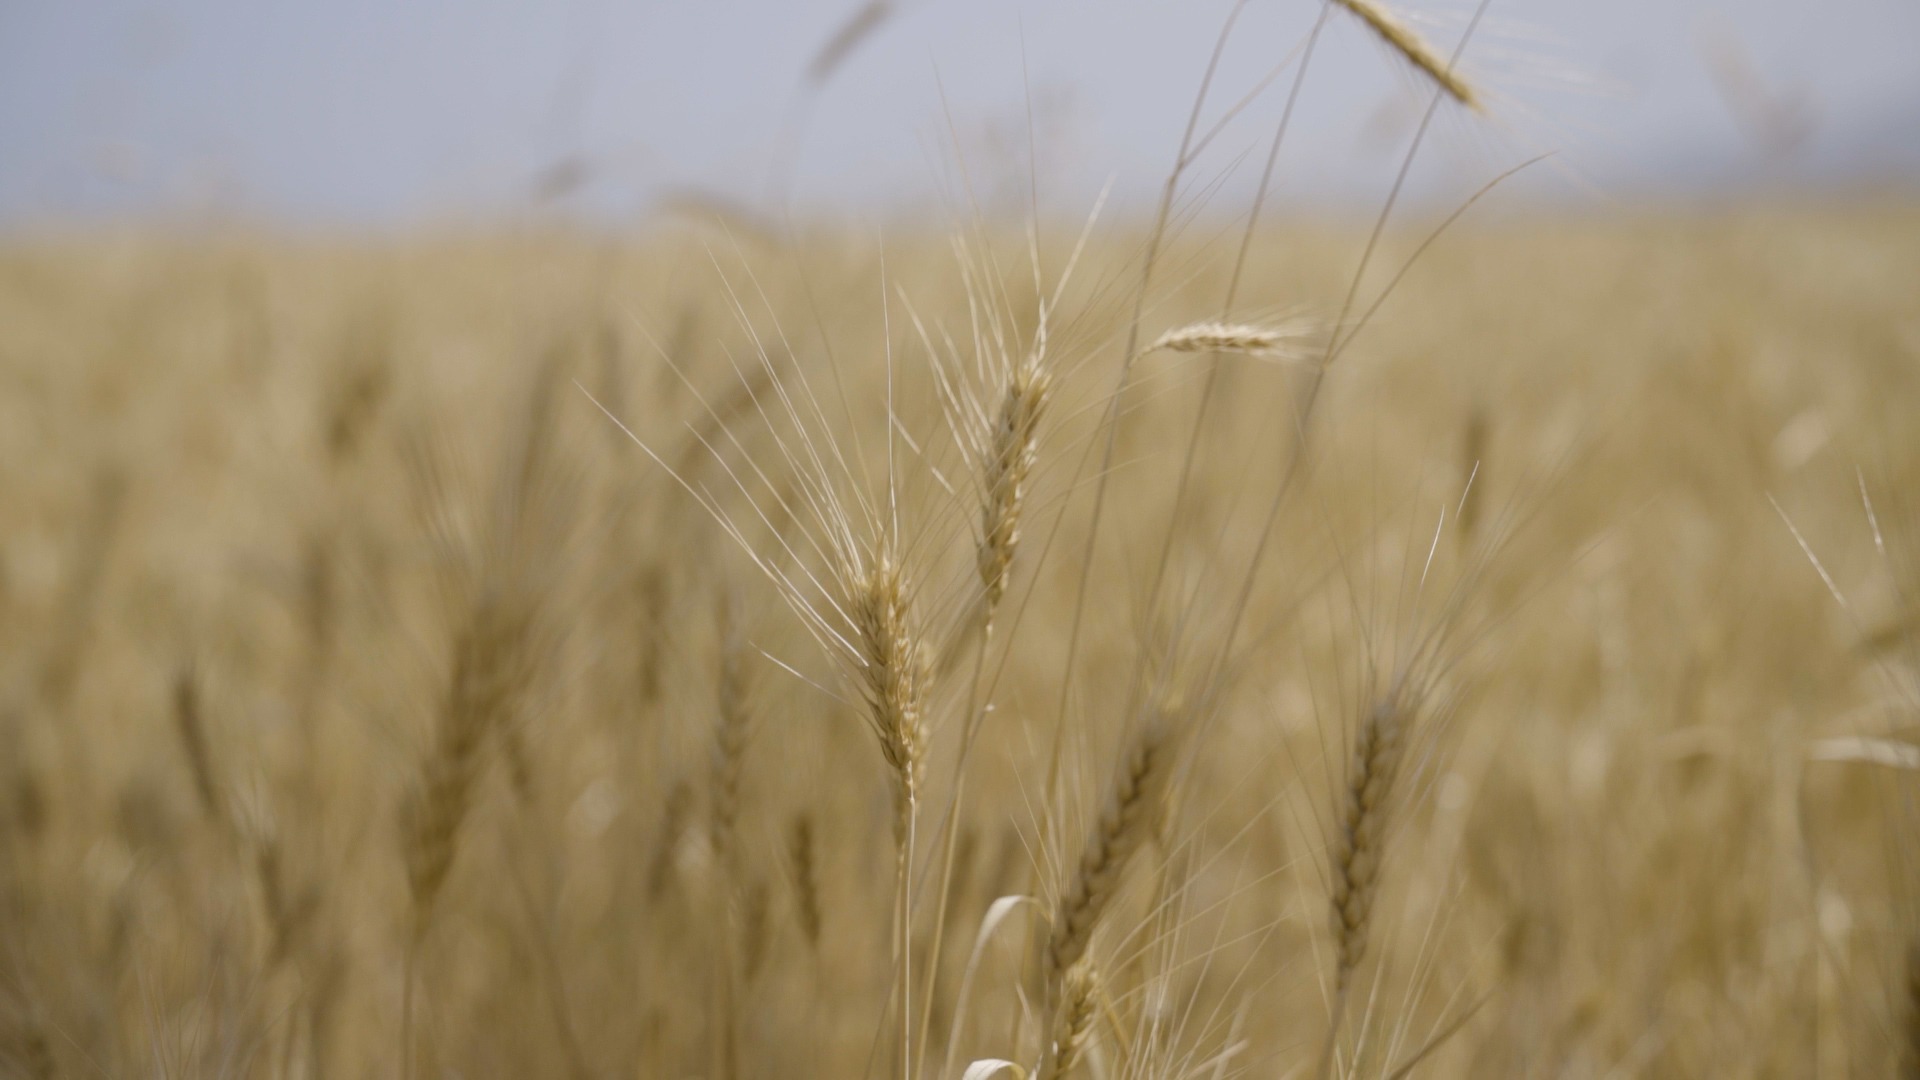 Decline in wheat production may impact Armenia’s food security